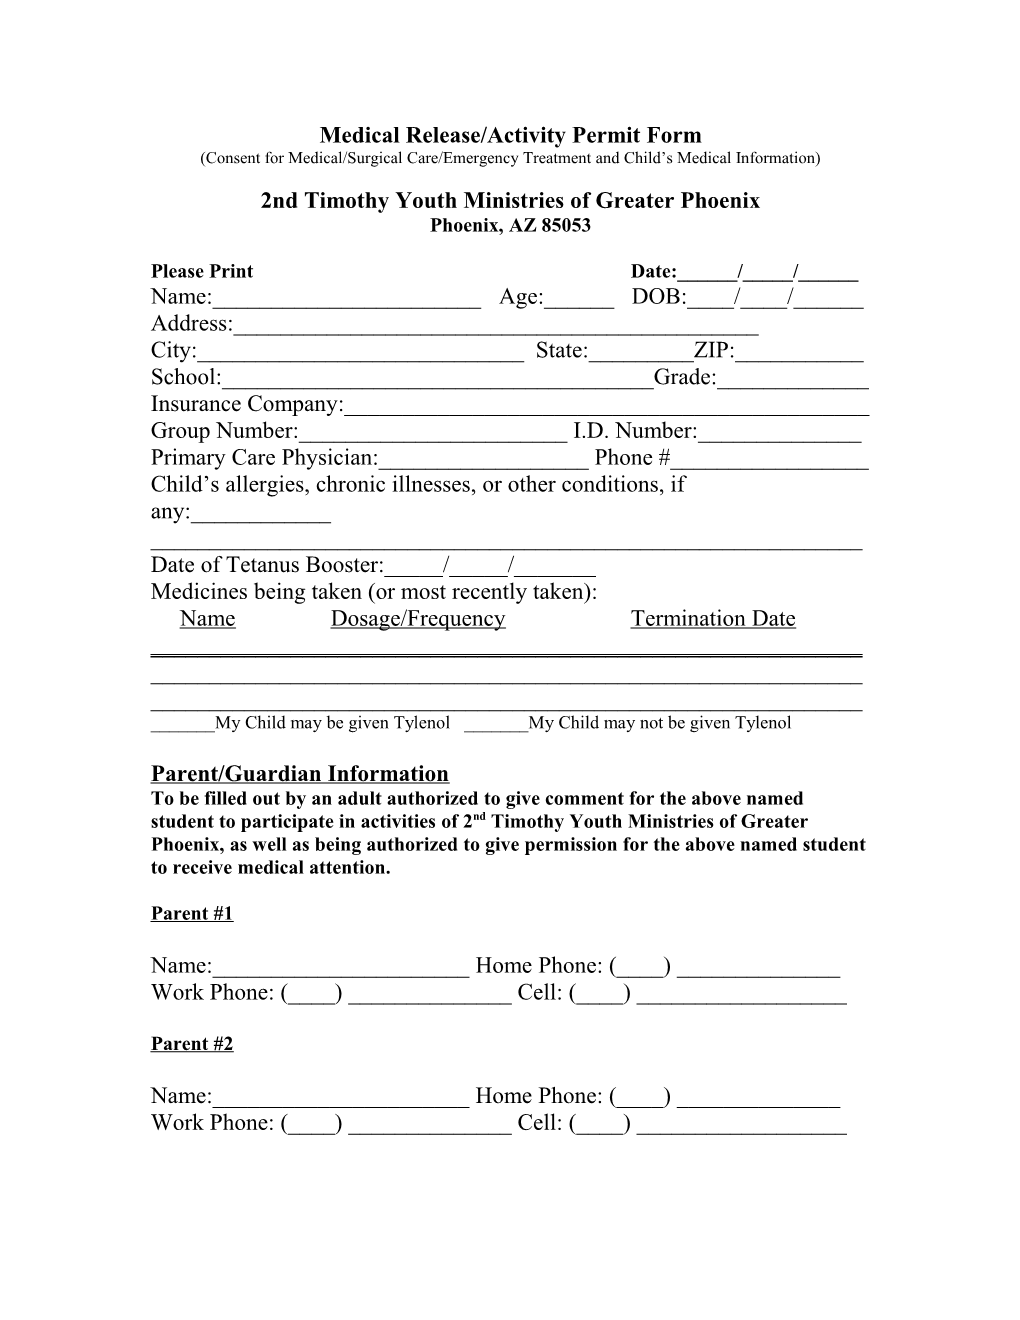 Medical Release/Activity Permit Form